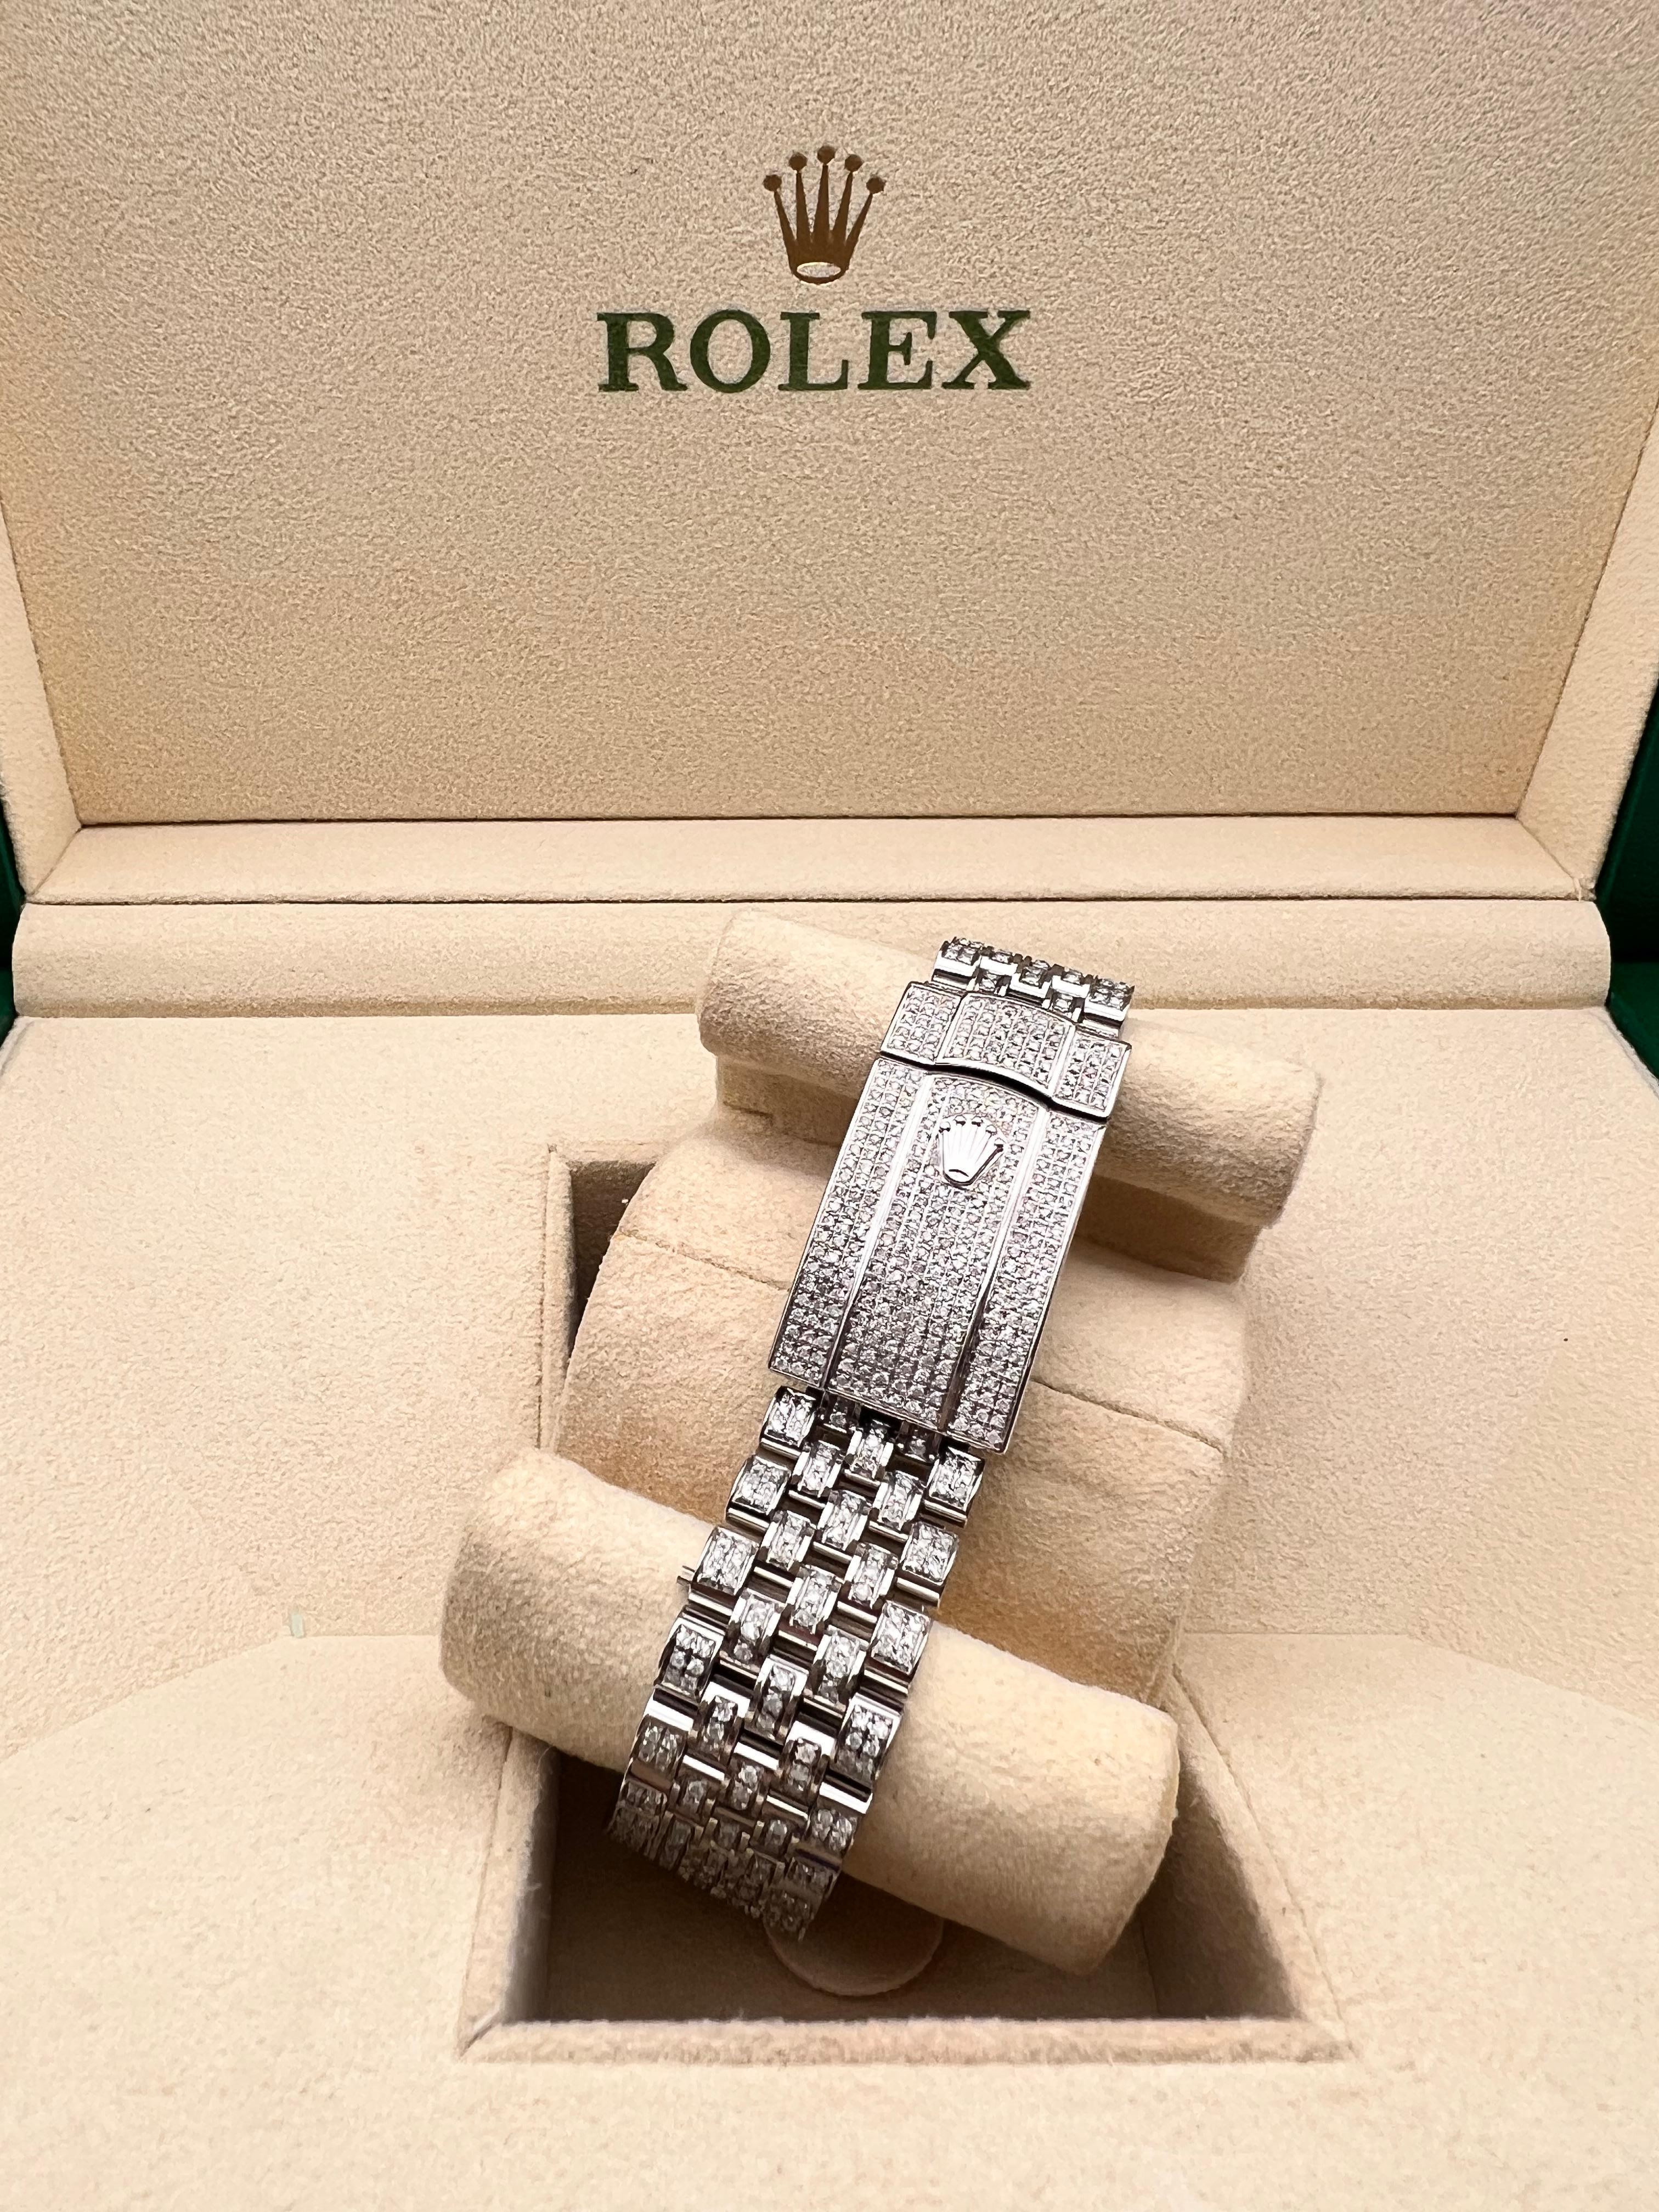 New Rolex Datejust Full Diamond green aftermarket 41mm with box and papers 2020 4